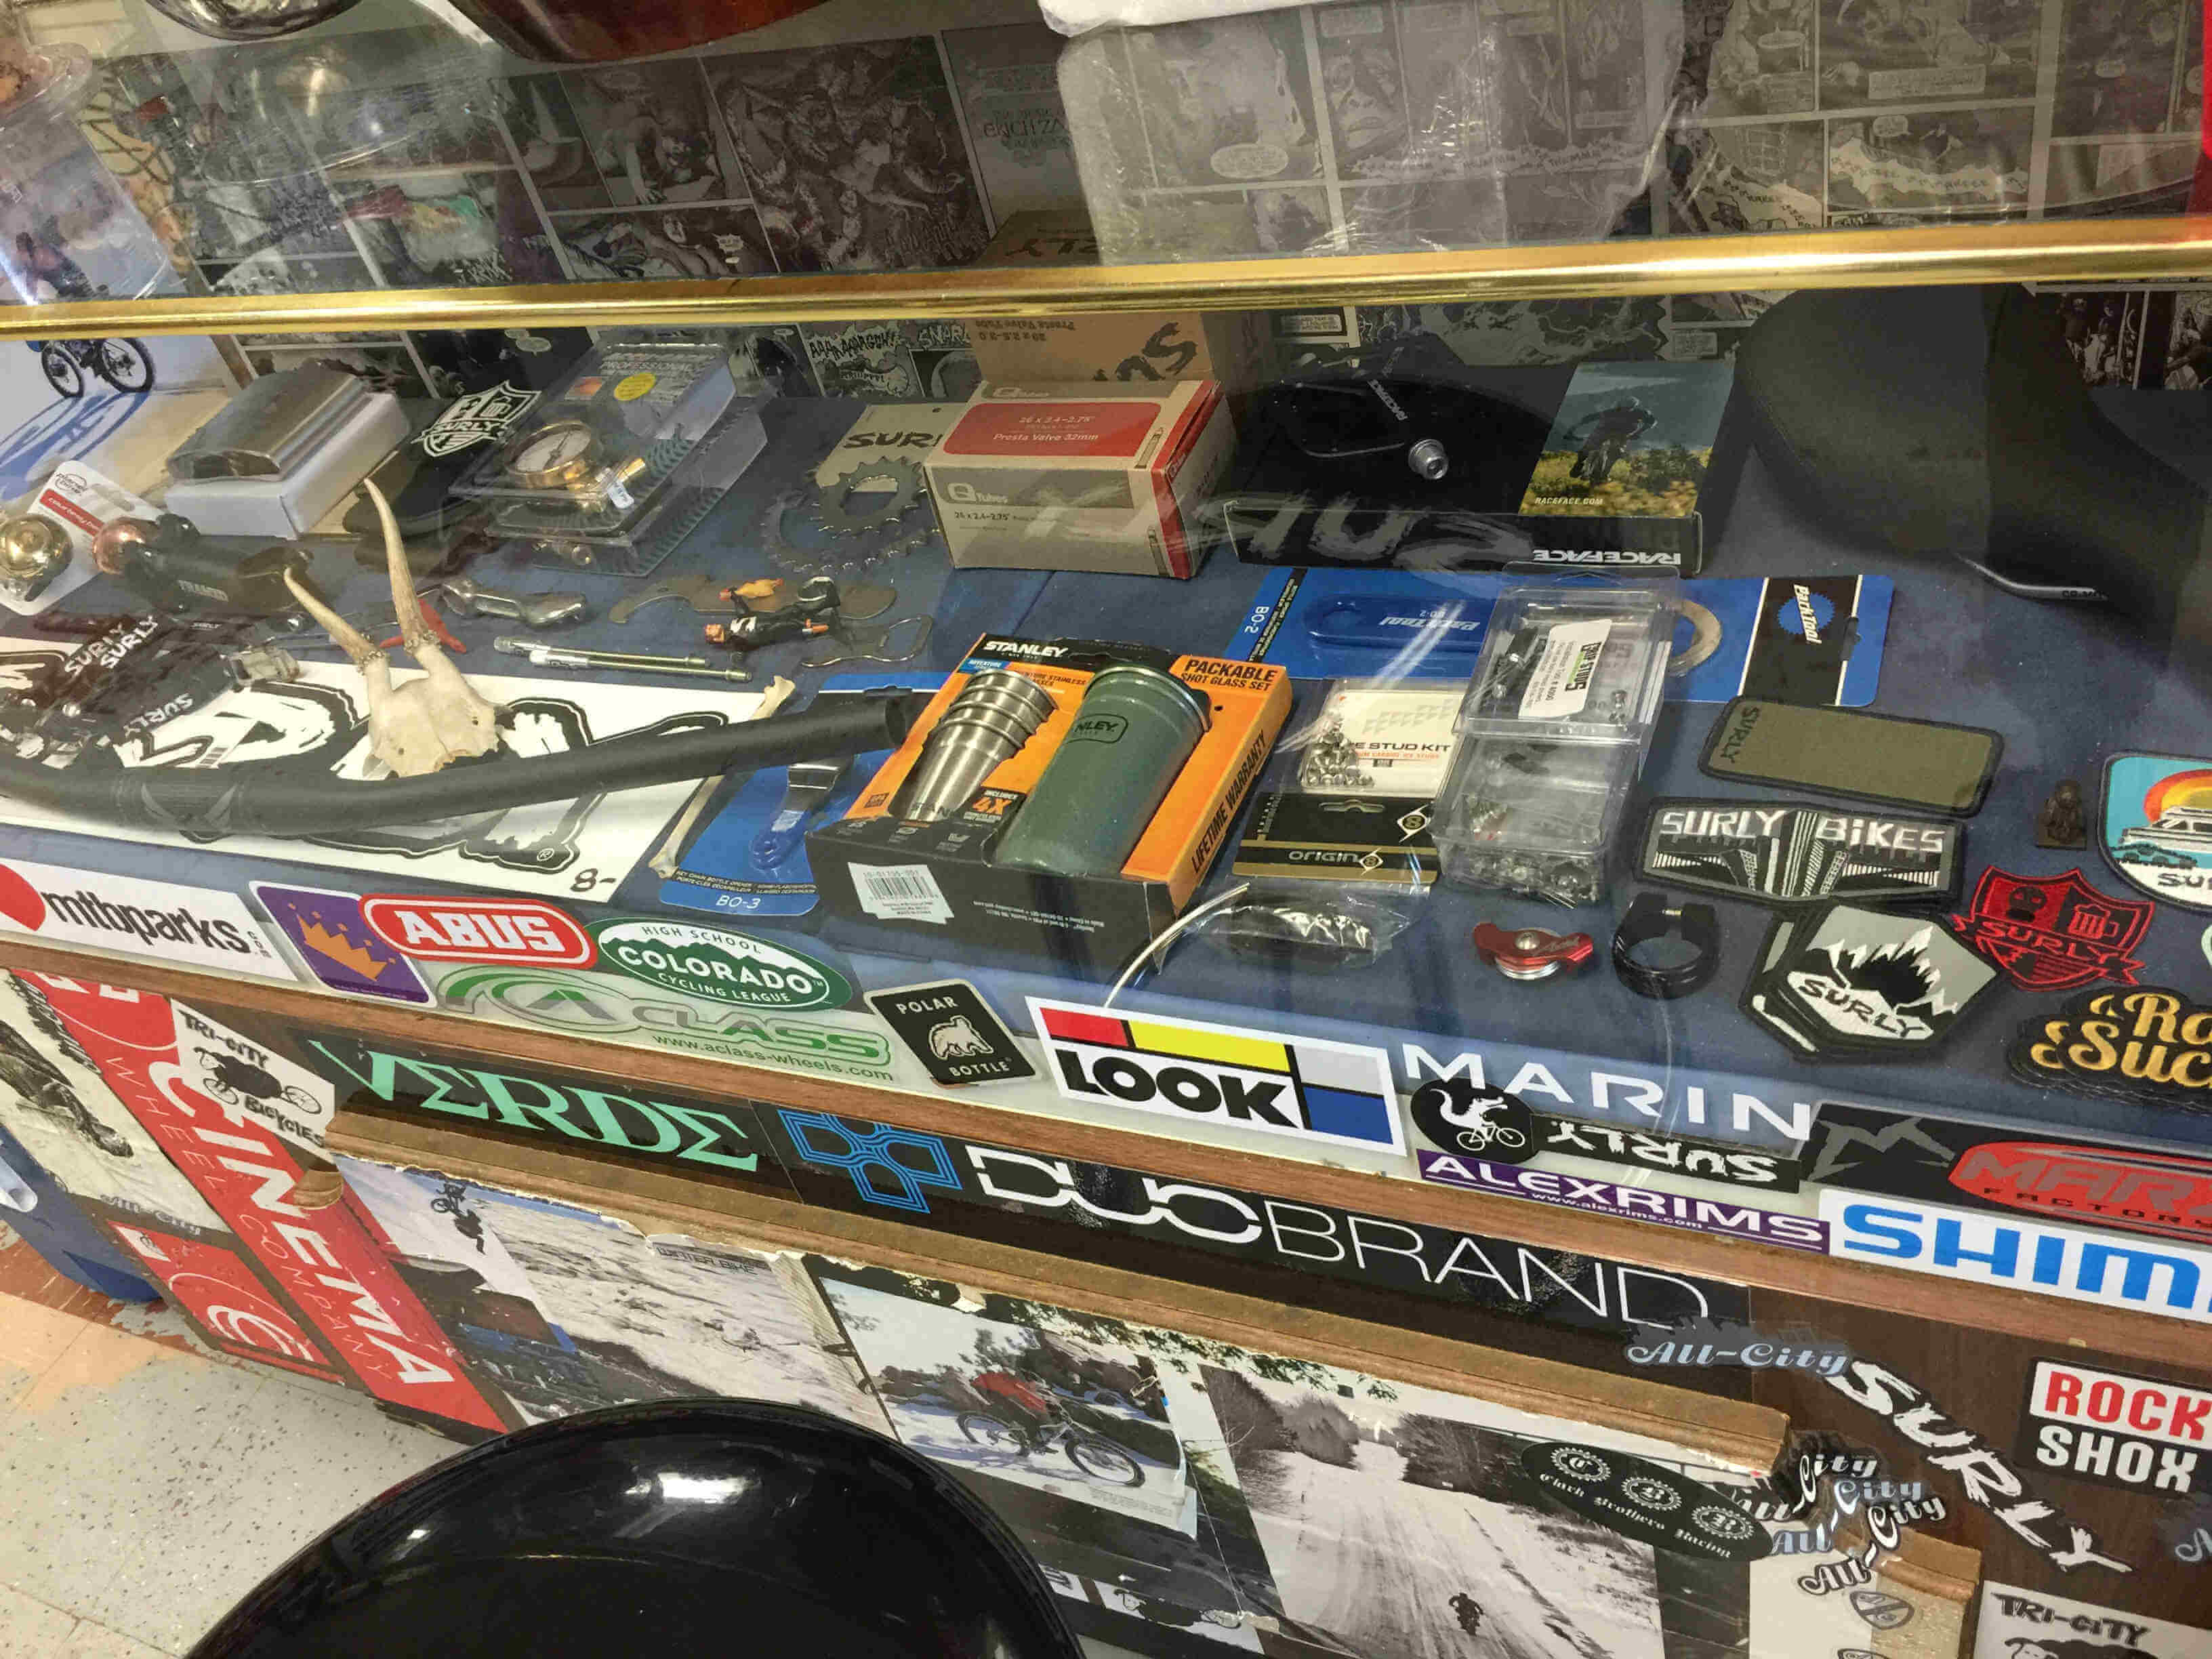 Downward view of a counter covered in various stickers, bike parts inside the glass case